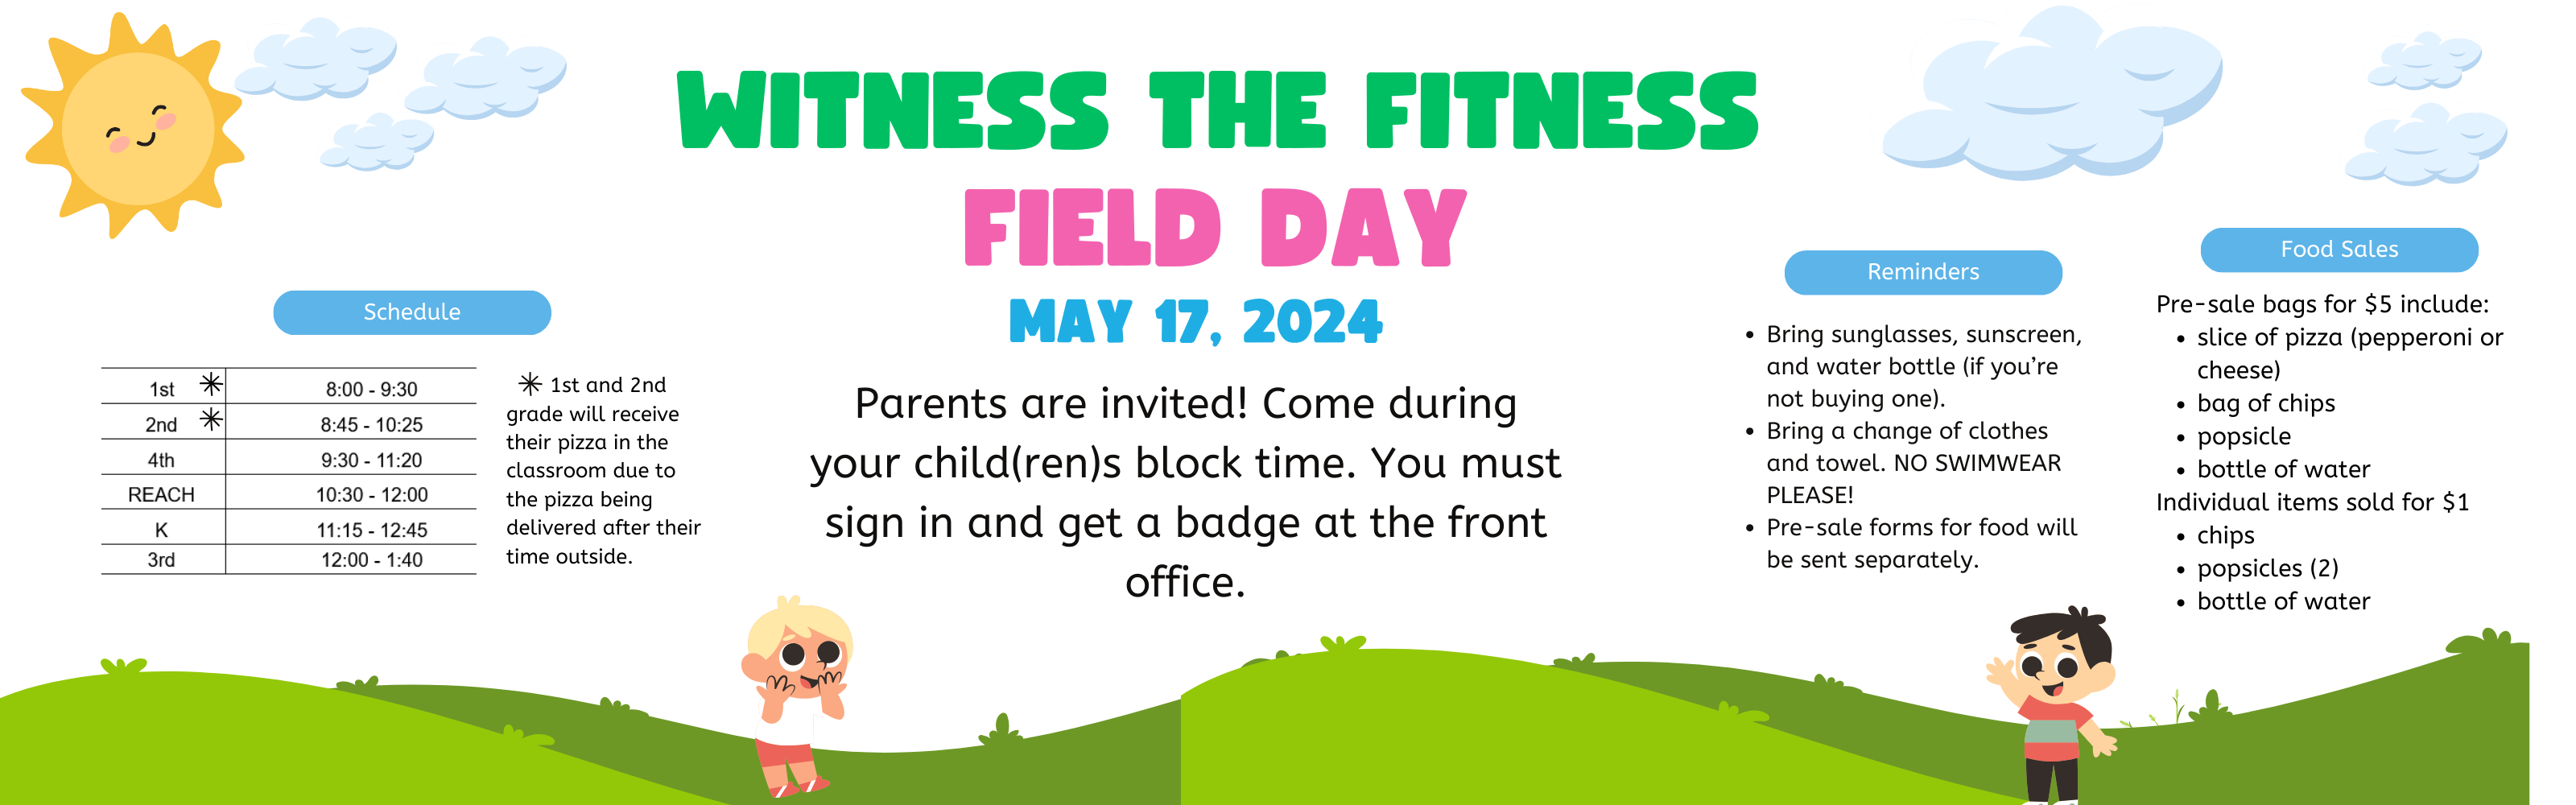 FIELD DAY MAY 17TH, 2024  "Parents are invited! Come during your child(ren)s block times. You must sign in and get a badge at the front office.    Food/Sales      Pre-sale bag for $5         Slice of Pizza (Choice of Cheese or Pepperoni)         Bag of Chips         Popsicle         Bottle of Water     Individual items sold for $1          Chips         Popsicles (2)         Water   Reminders      Bring sunglasses, sunscreen, and water bottle (if you're not buying one!)     Bring a change of clothes and towel. NO SWIMWEAR PLEASE!   Schedule  1st 	 8:00 - 9:30 2nd 	 8:45 - 10:25 4th 	 9:30 - 11:20 REACH 	 10:30 - 12:00 K 	 11:15 - 12:45 3rd 	 12:00 - 1:40